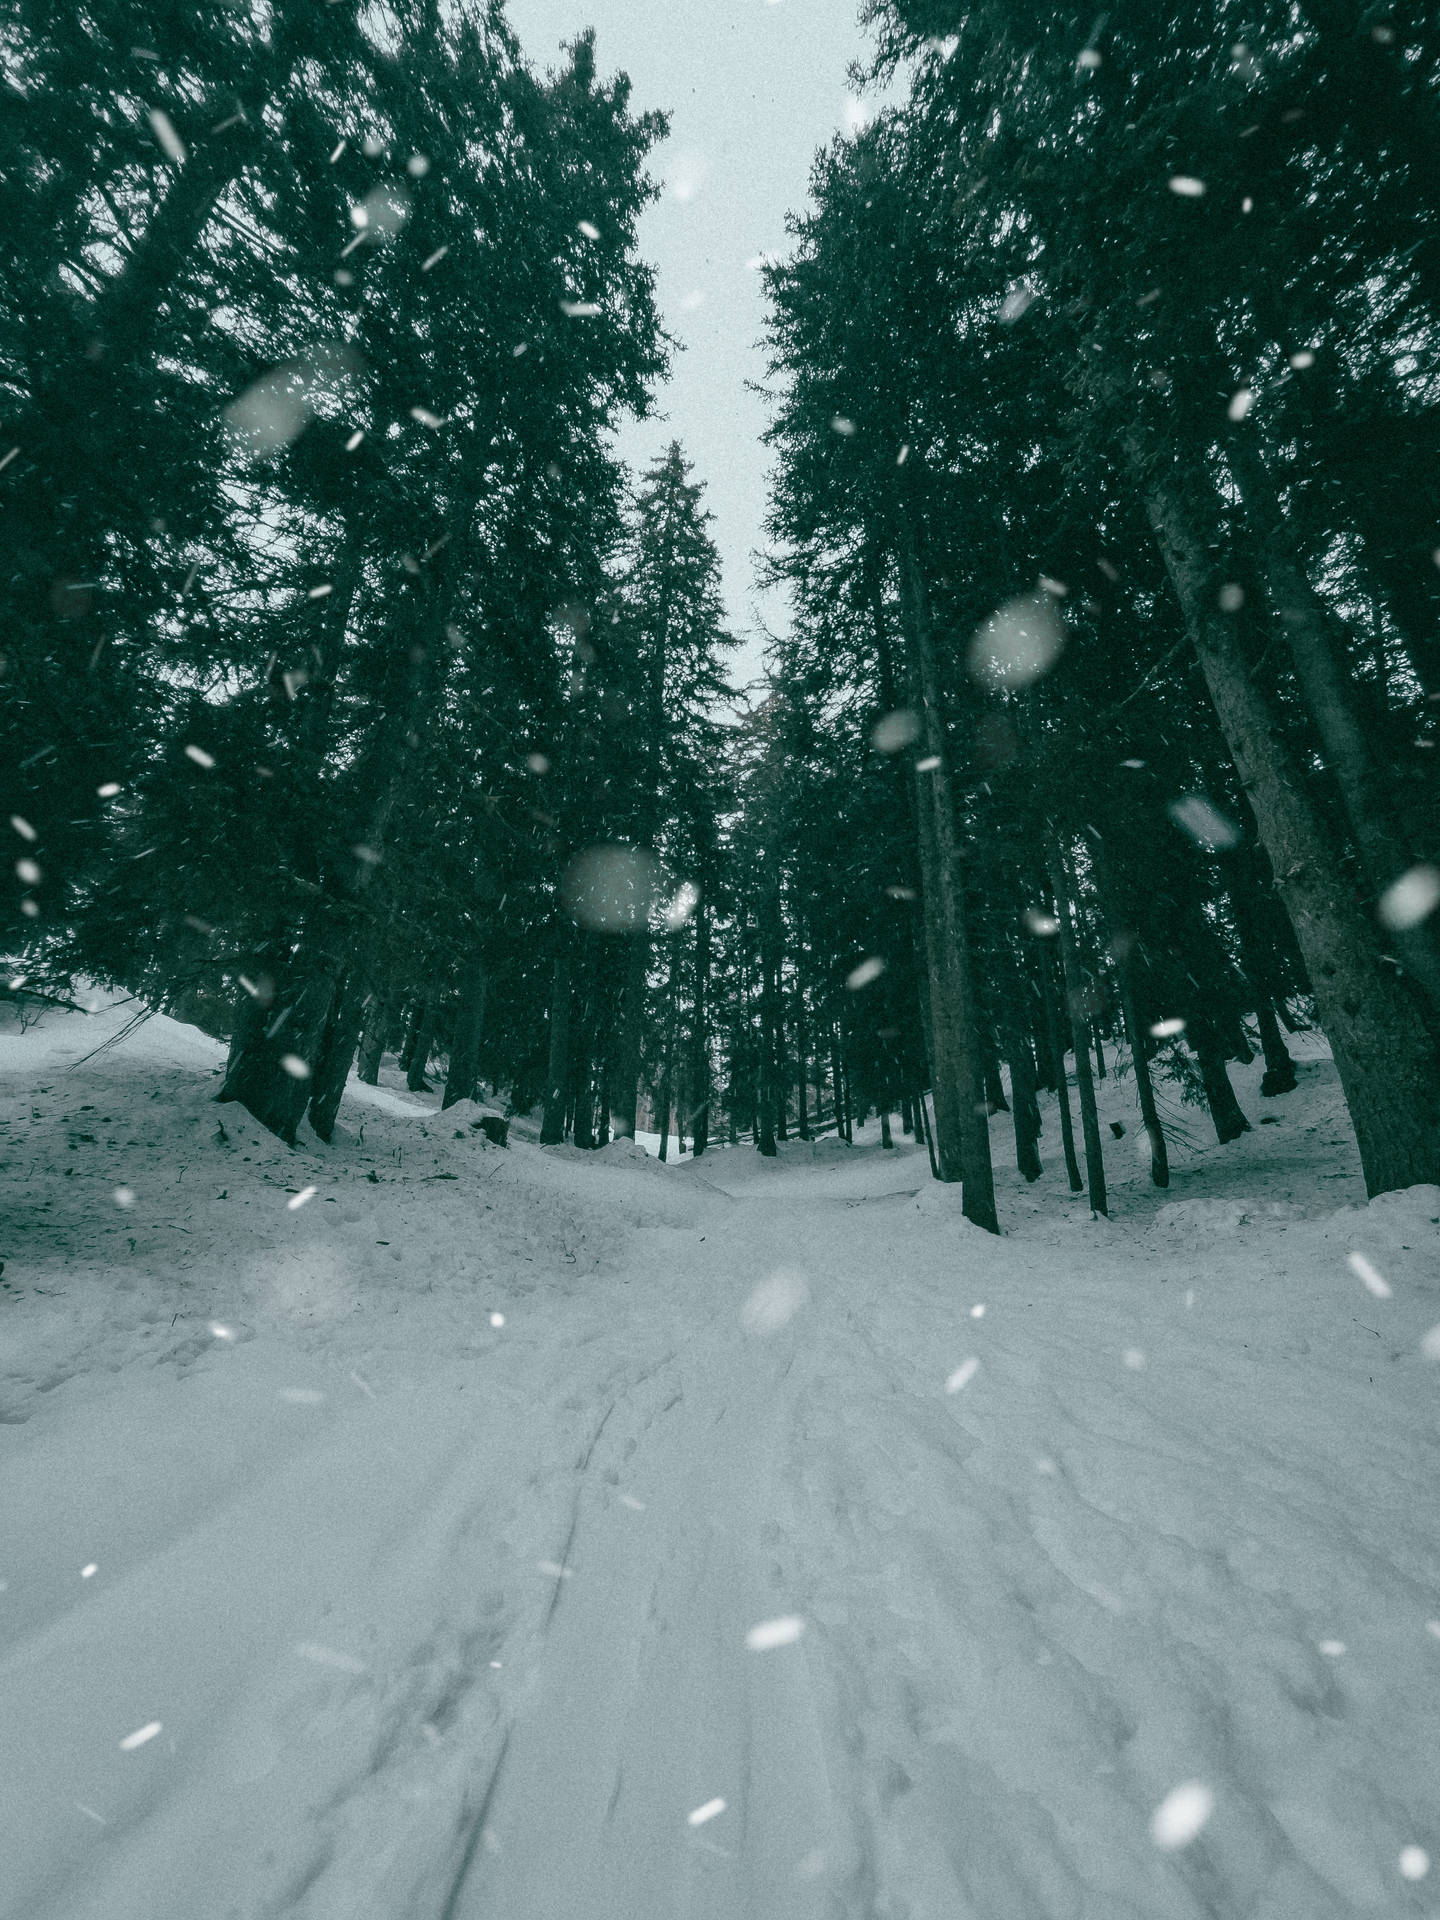 Snowy Pine Trees In Montana Iphone Wallpaper